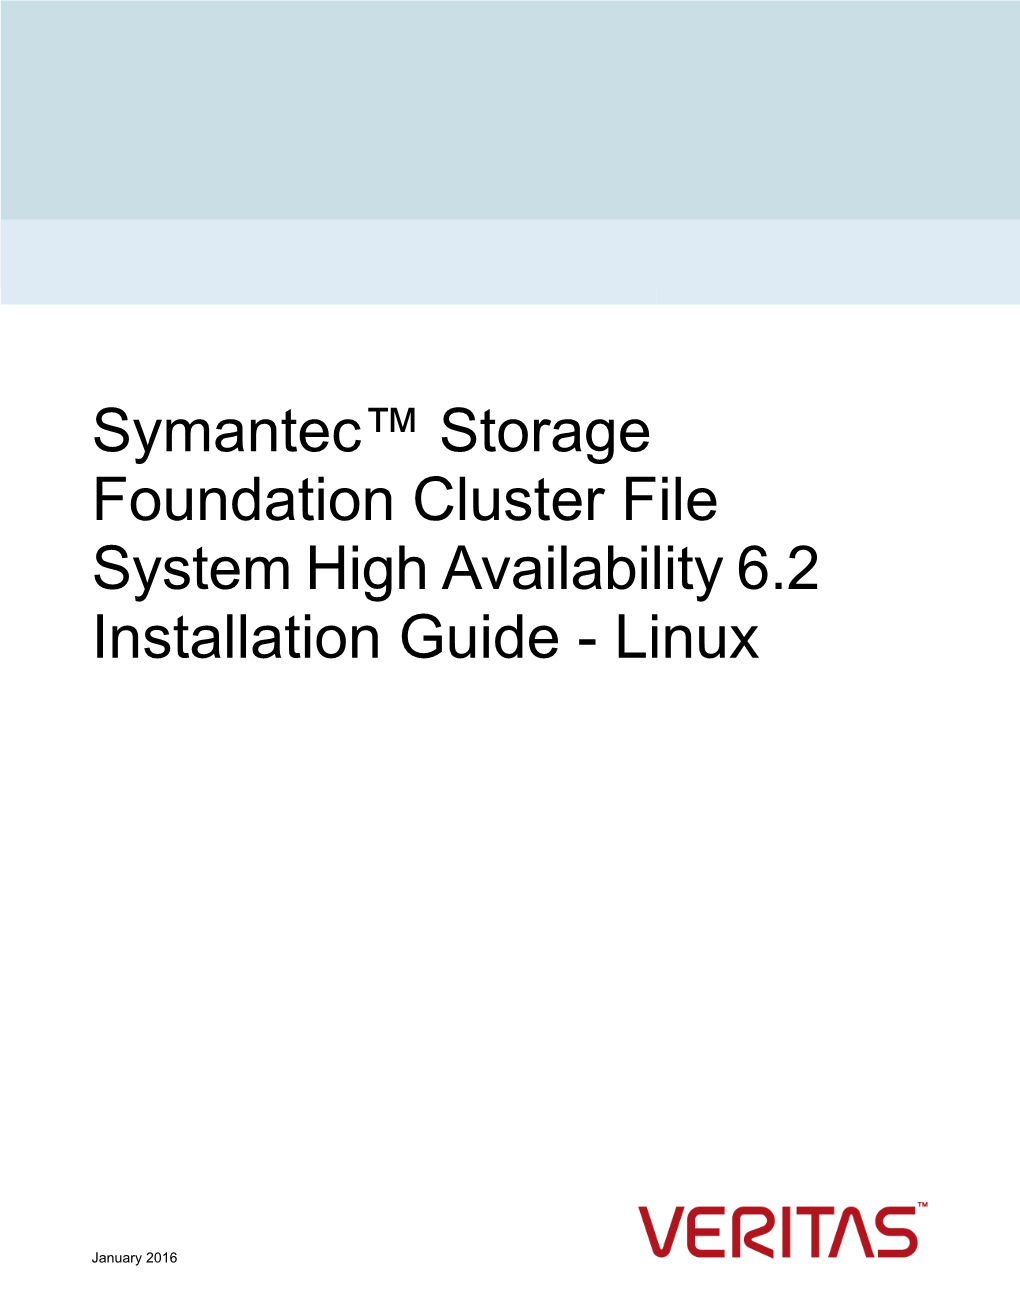 Symantec™ Storage Foundation Cluster File System High Availability 6.2 Installation Guide - Linux